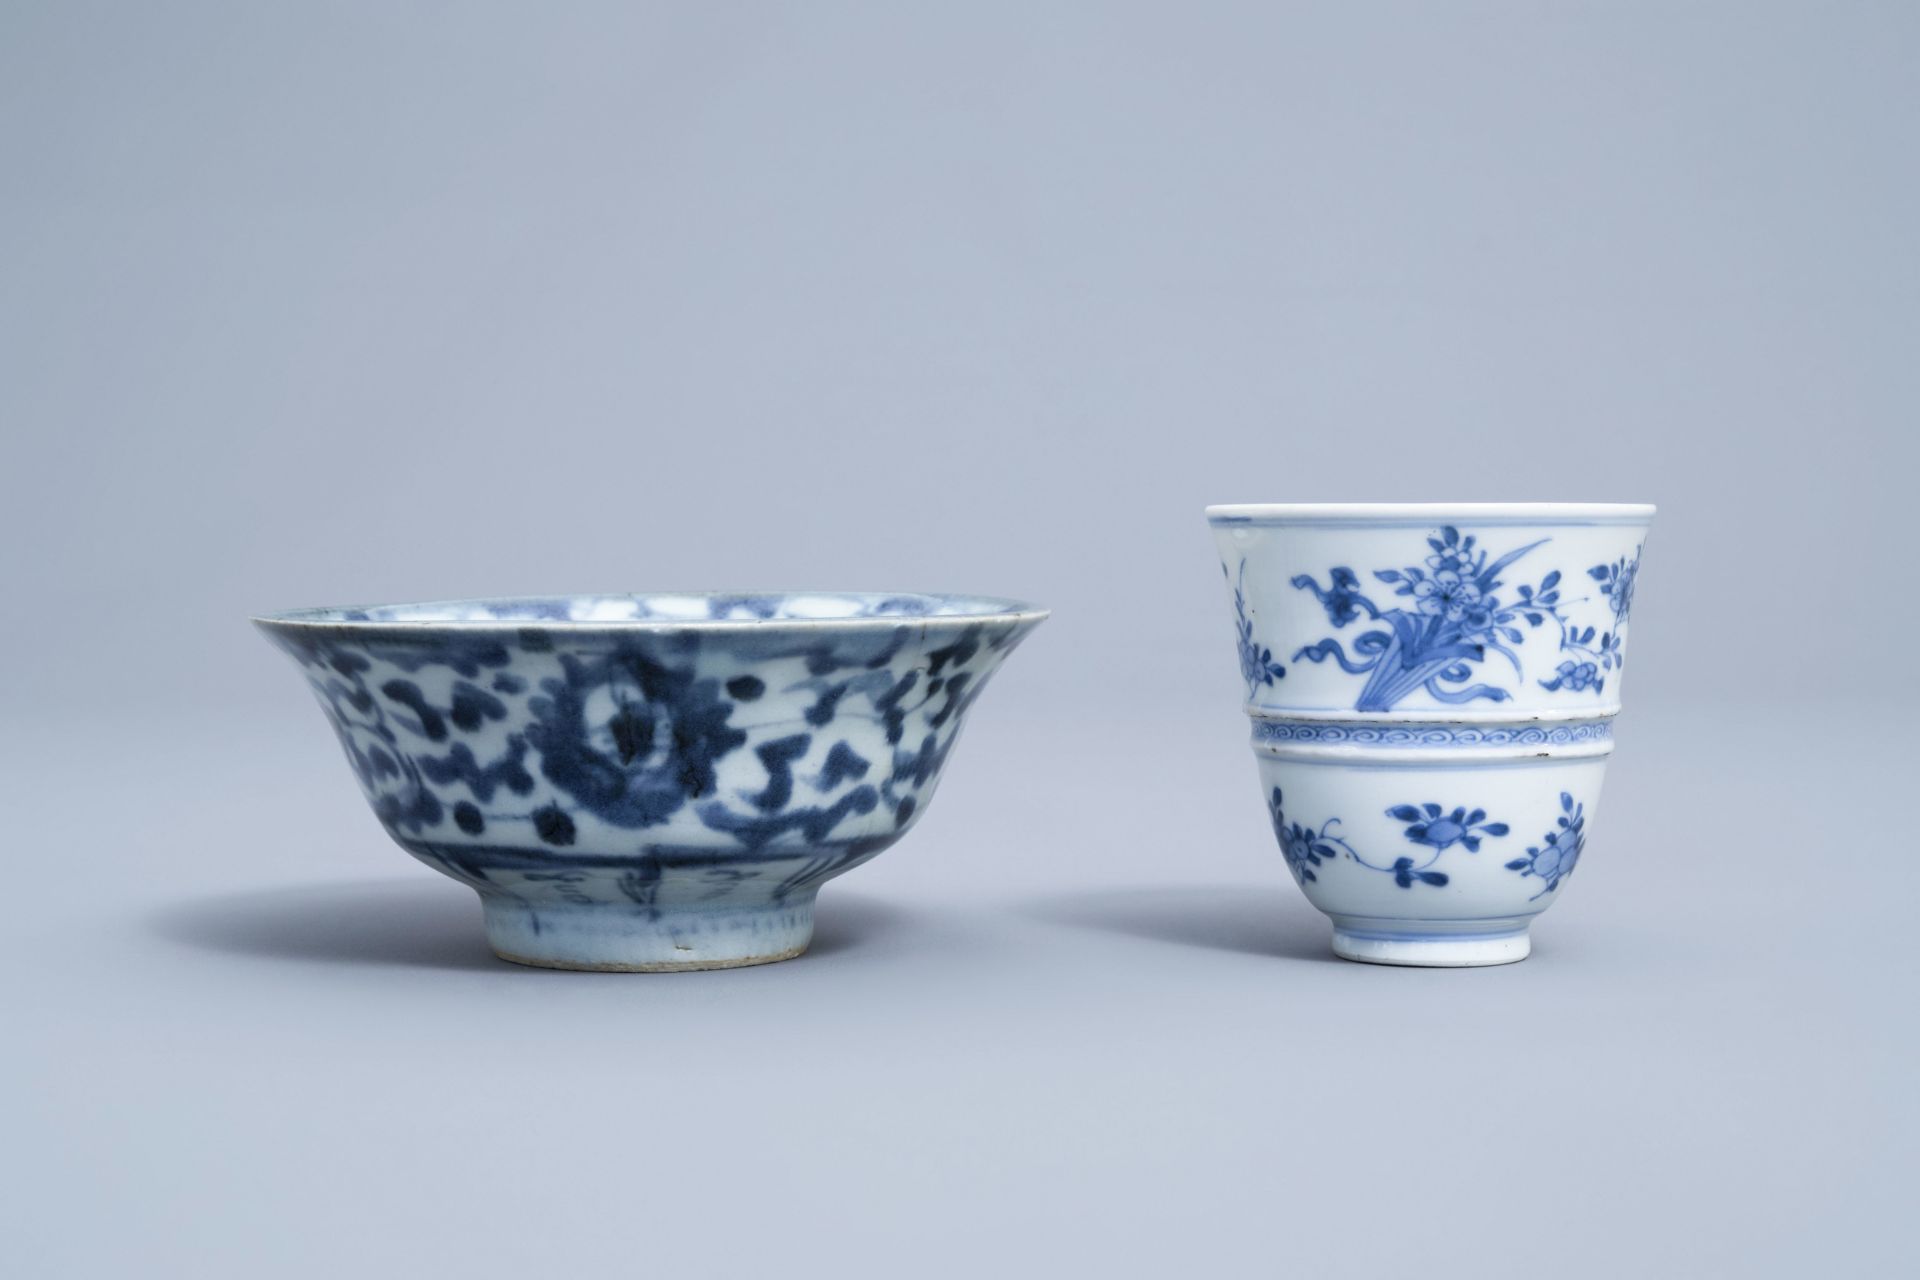 A varied collection of Chinese blue and white porcelain, 18th C. and later - Image 24 of 54